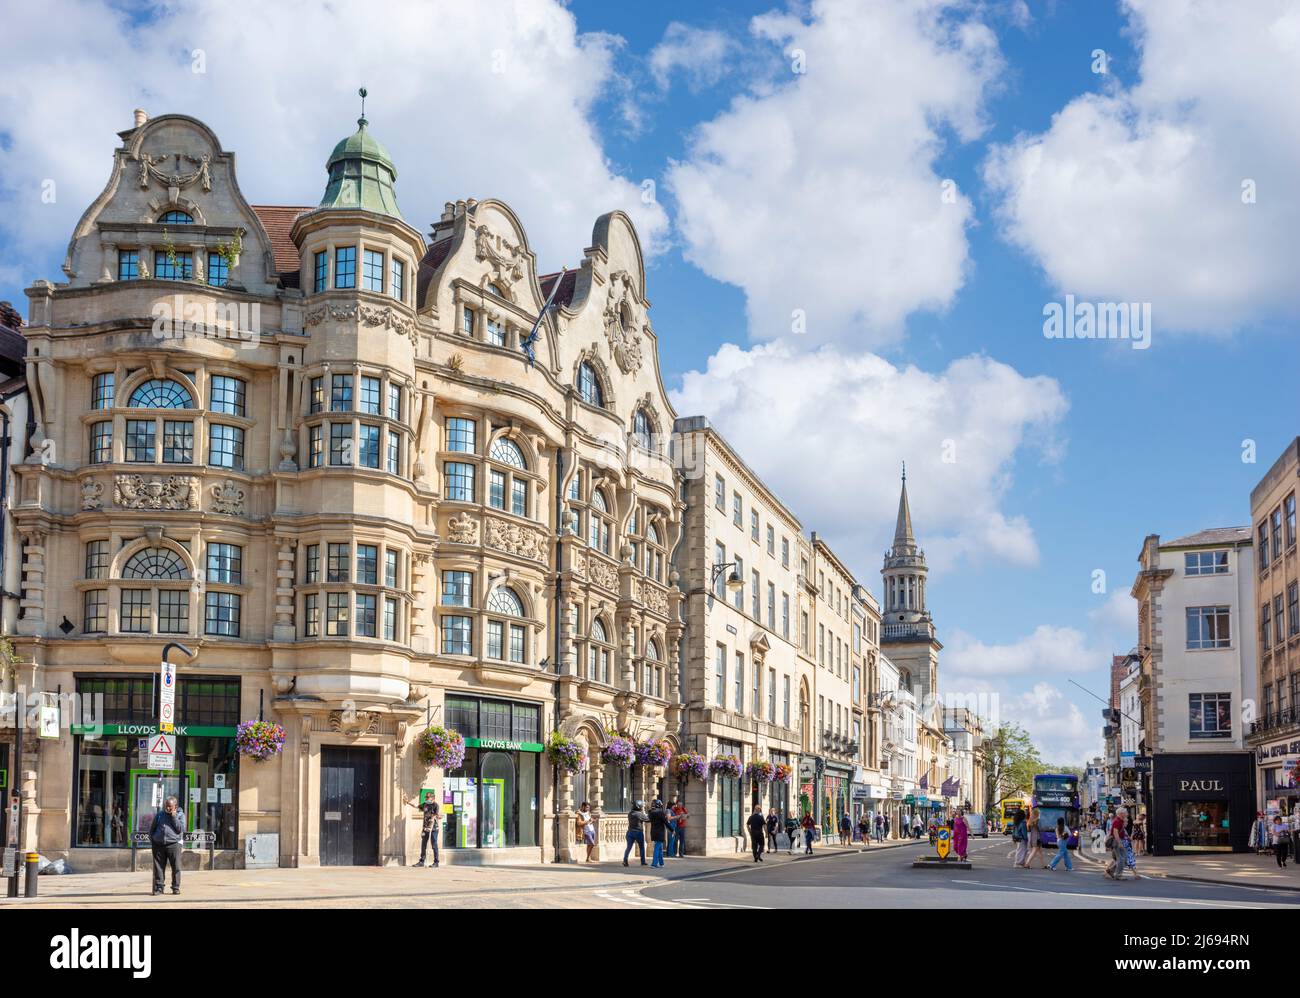 Oxford city centre at Junction of High street, Queen Street, St. Aldates and Cornmarket Street, Oxford, Oxfordshire, England, United Kingdom Stock Photo